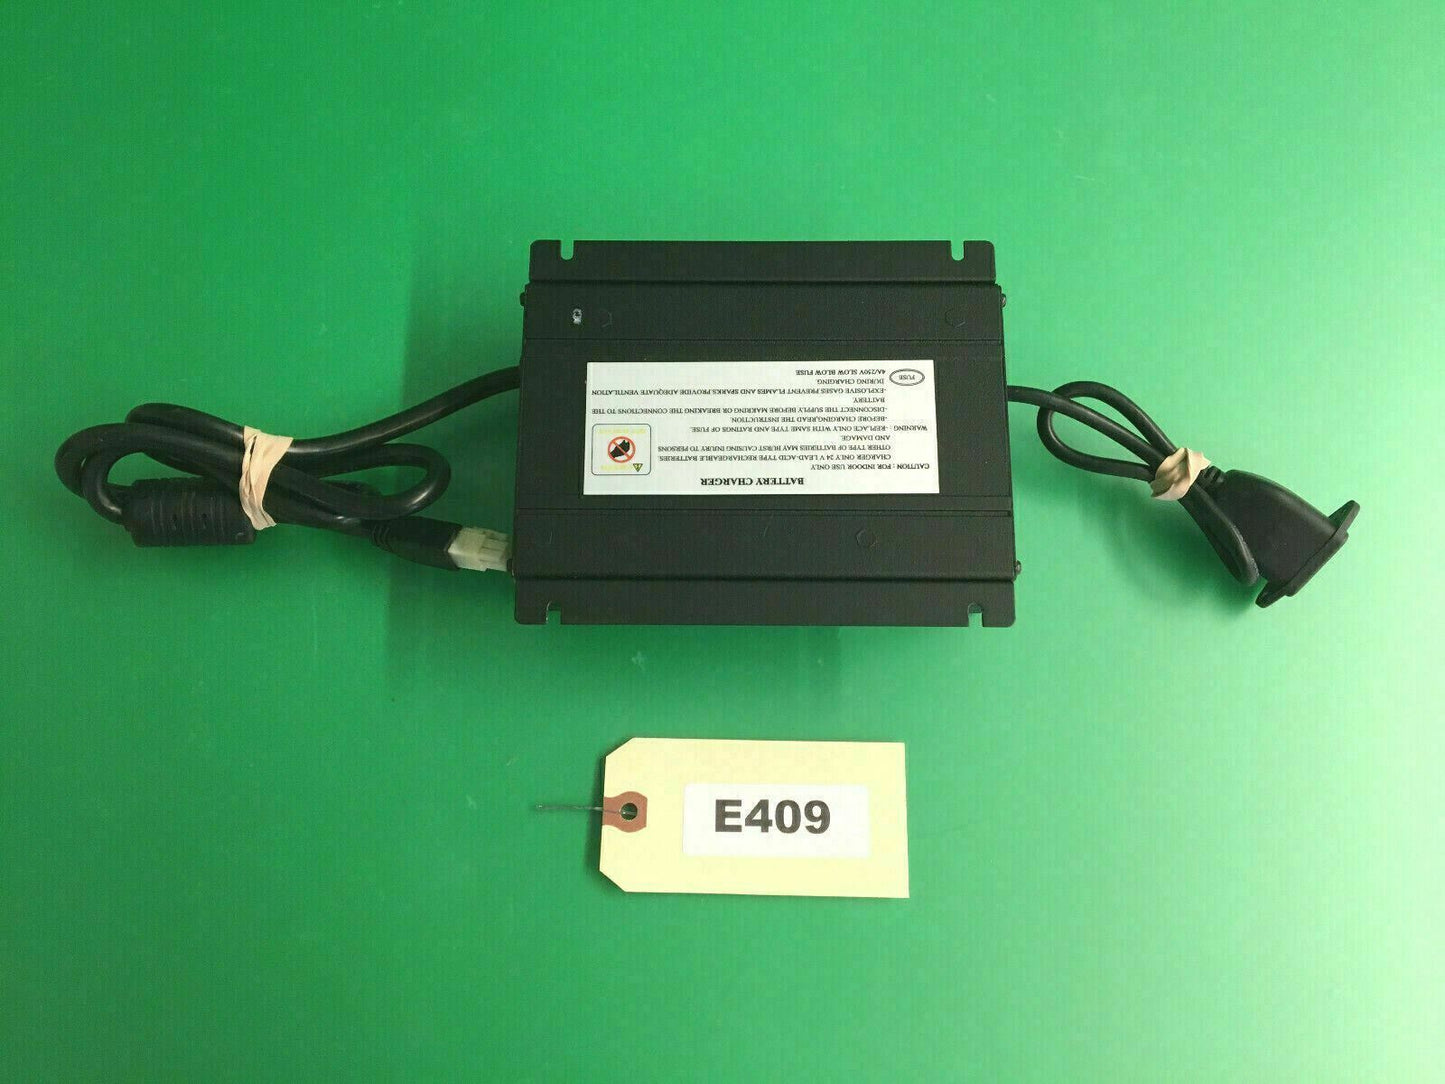 24 Volt 5 Amp On-Board Battery Charger for Invacare Pronto M91 4C24050A #E409